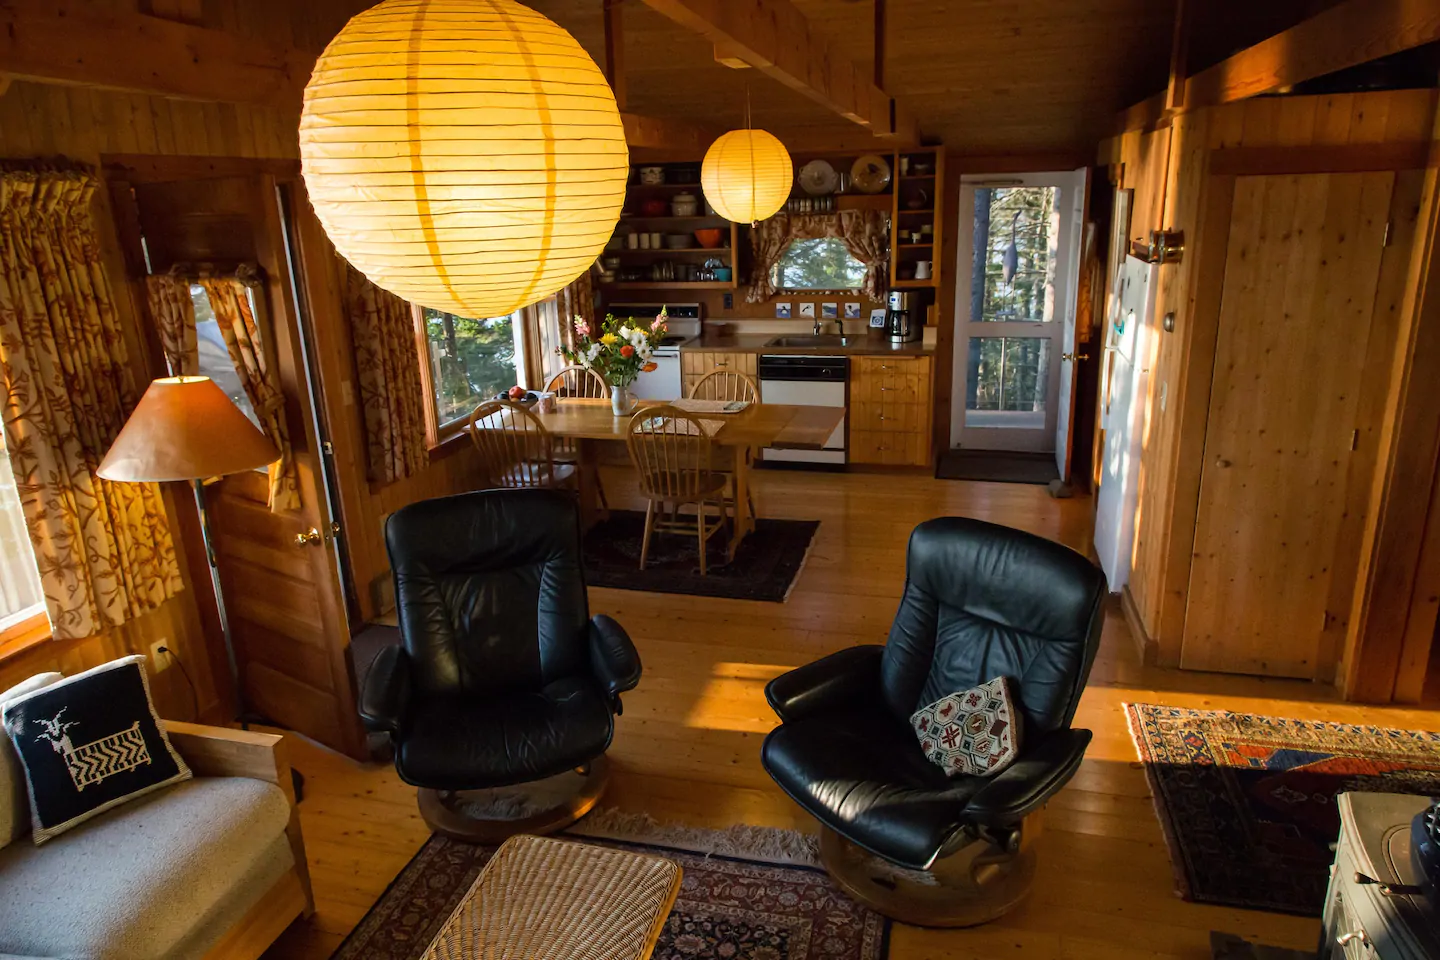 Interior of a log cabin with warm lighting. The foreground features two leather chairs and a coffee table. The background has the kitchen with a wooden table featuring four chairs.